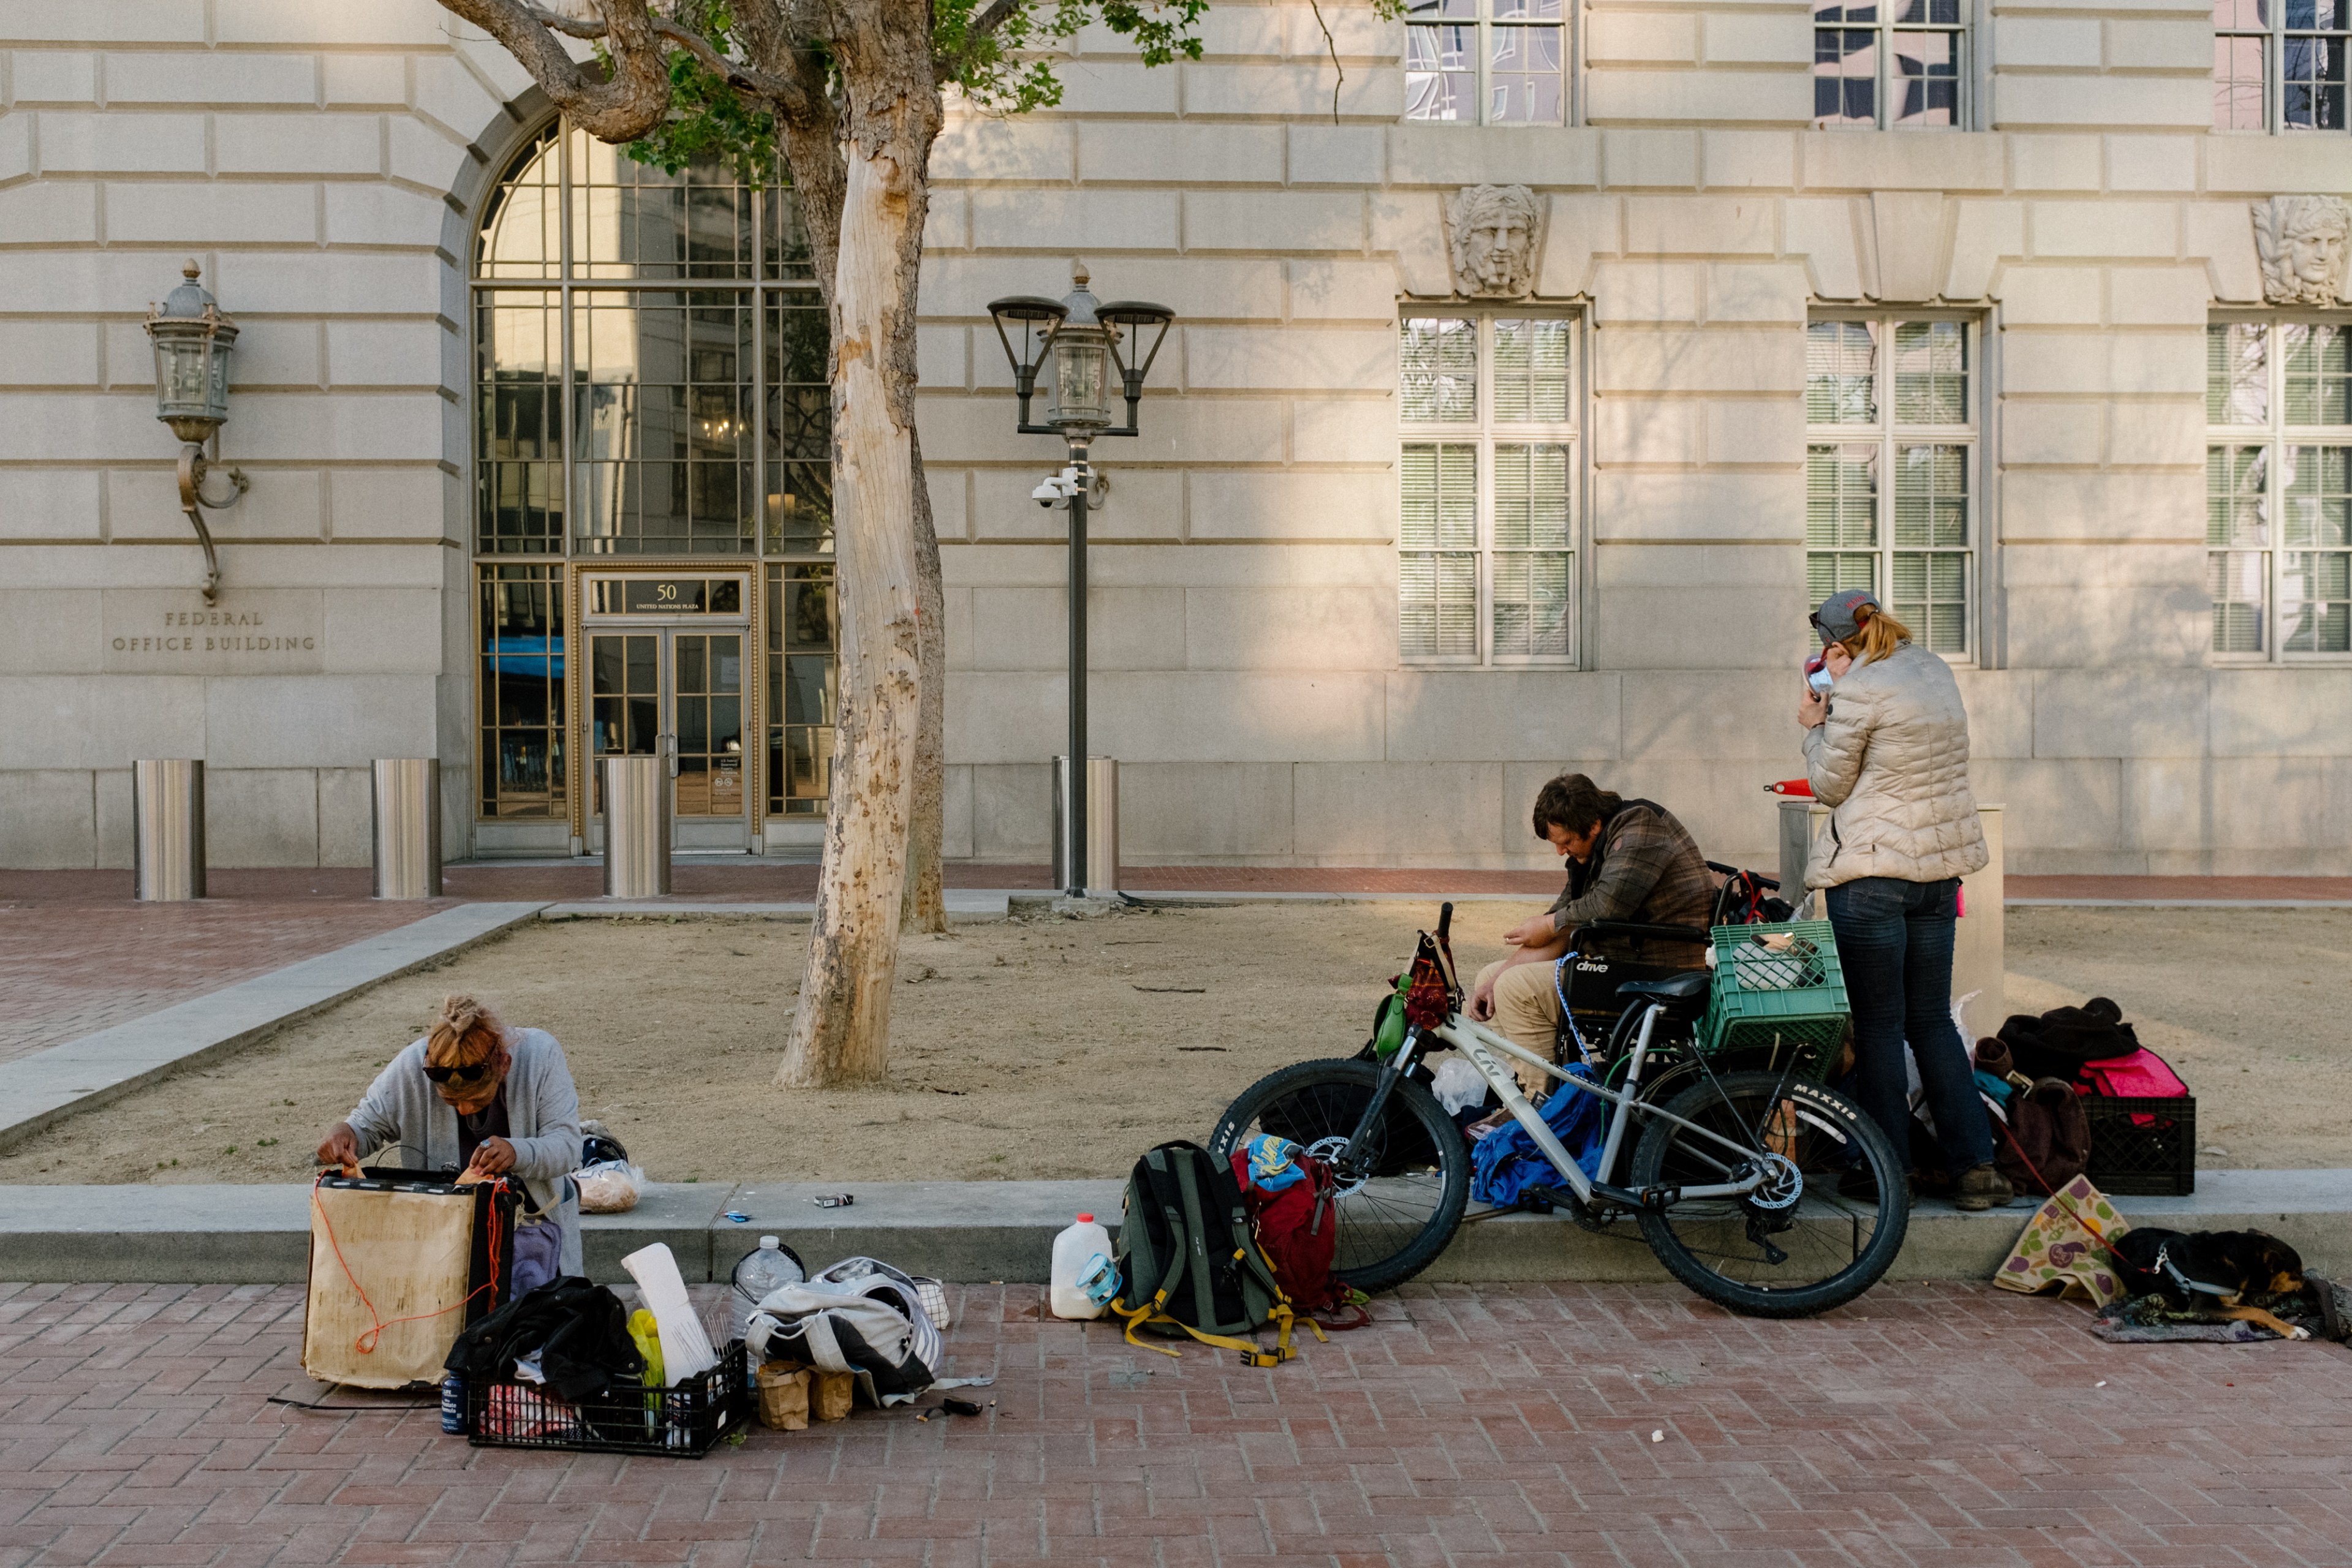 Three people sit by a building with belongings, a bicycle, and a dog lying down.